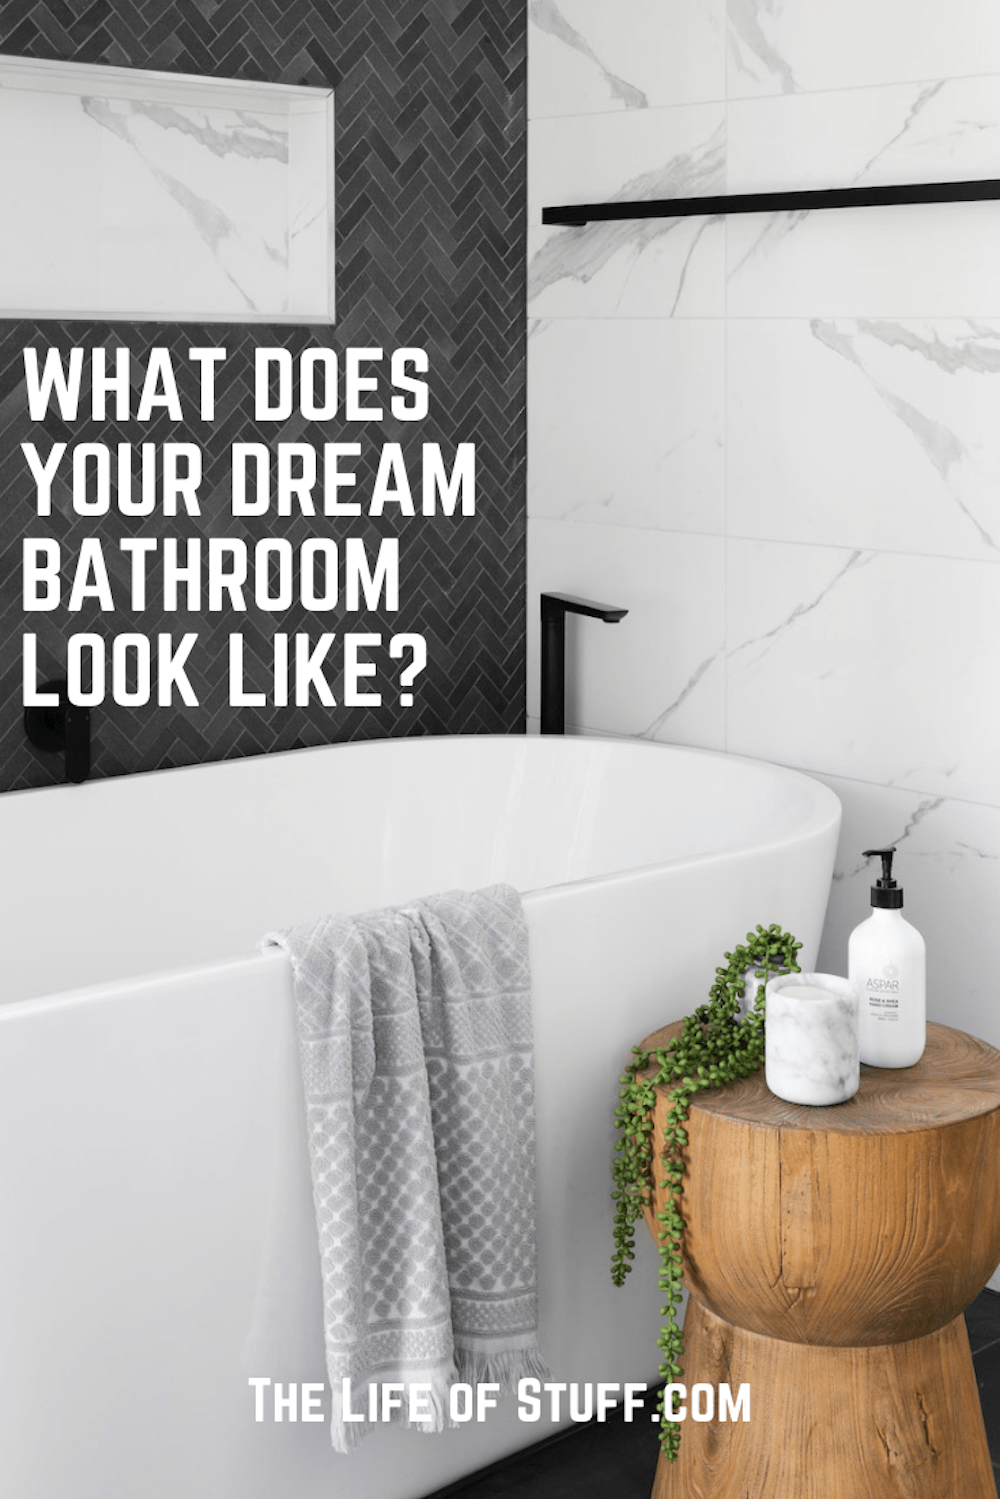 Home Style - What Does Your Dream Bathroom Look Like - The Life of Stuff